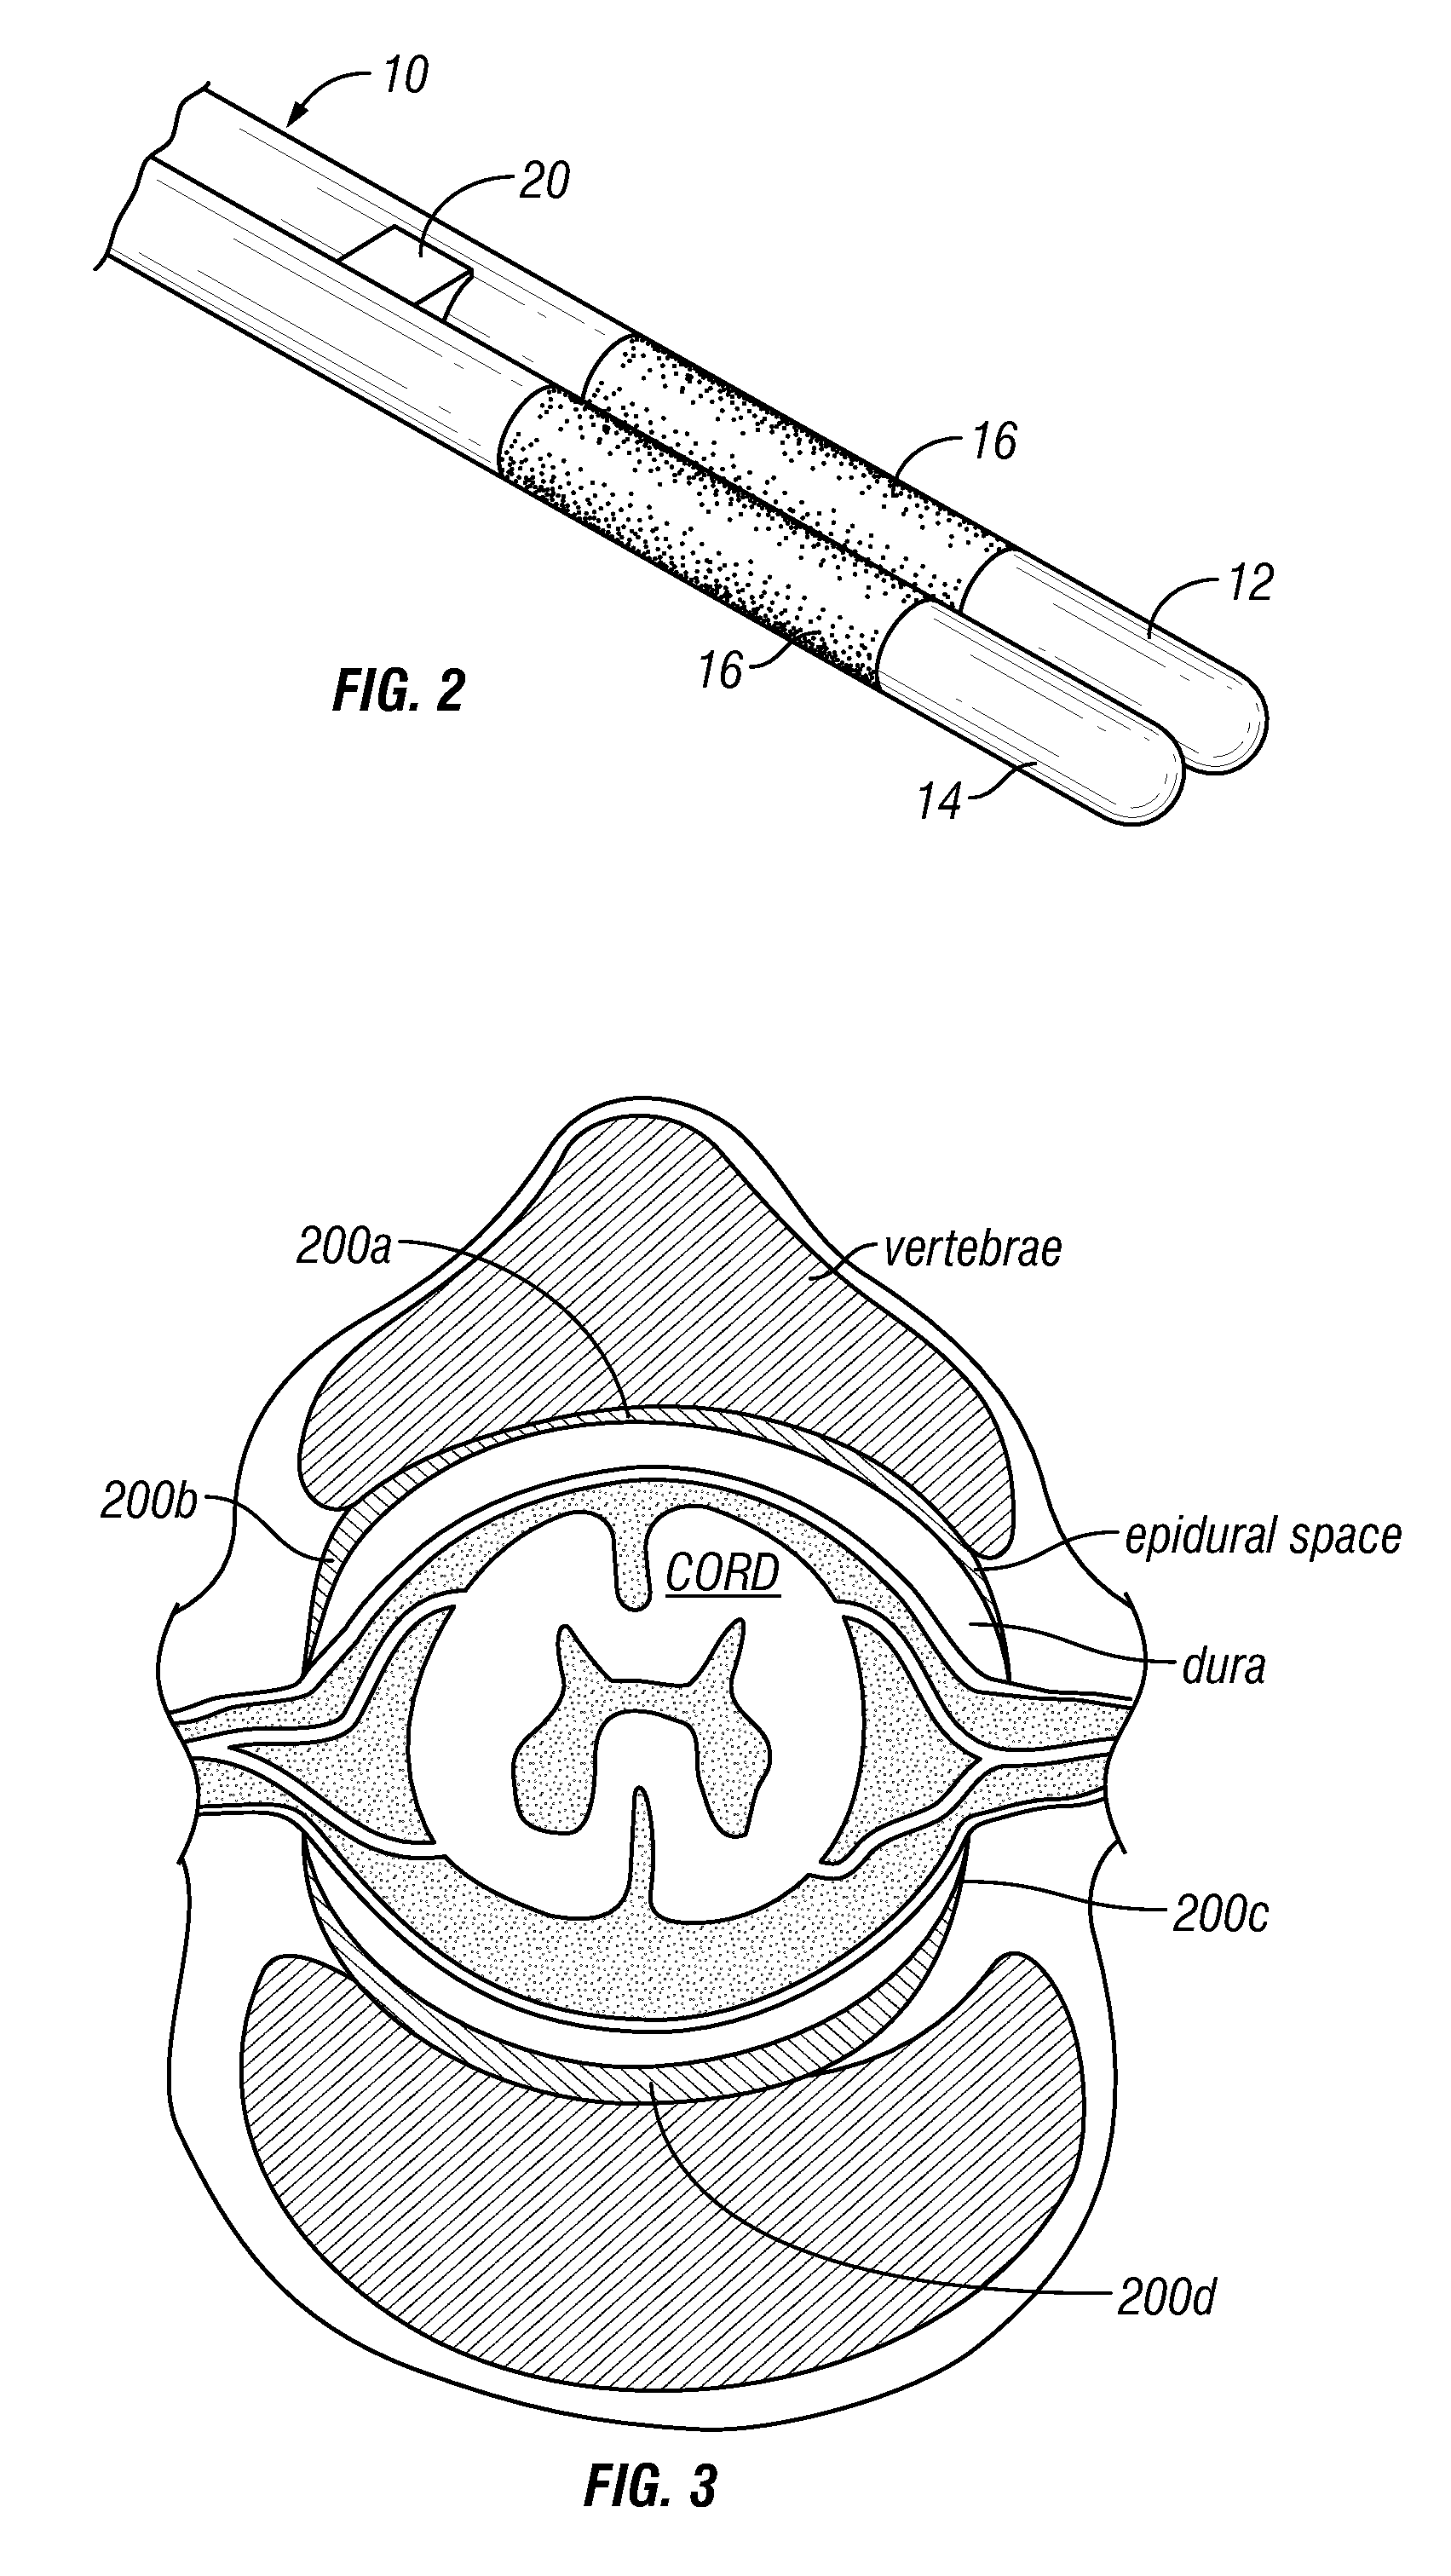 Systems, Methods and Apparatus for Treating Cardiac Dysfunction with Neurostimulation